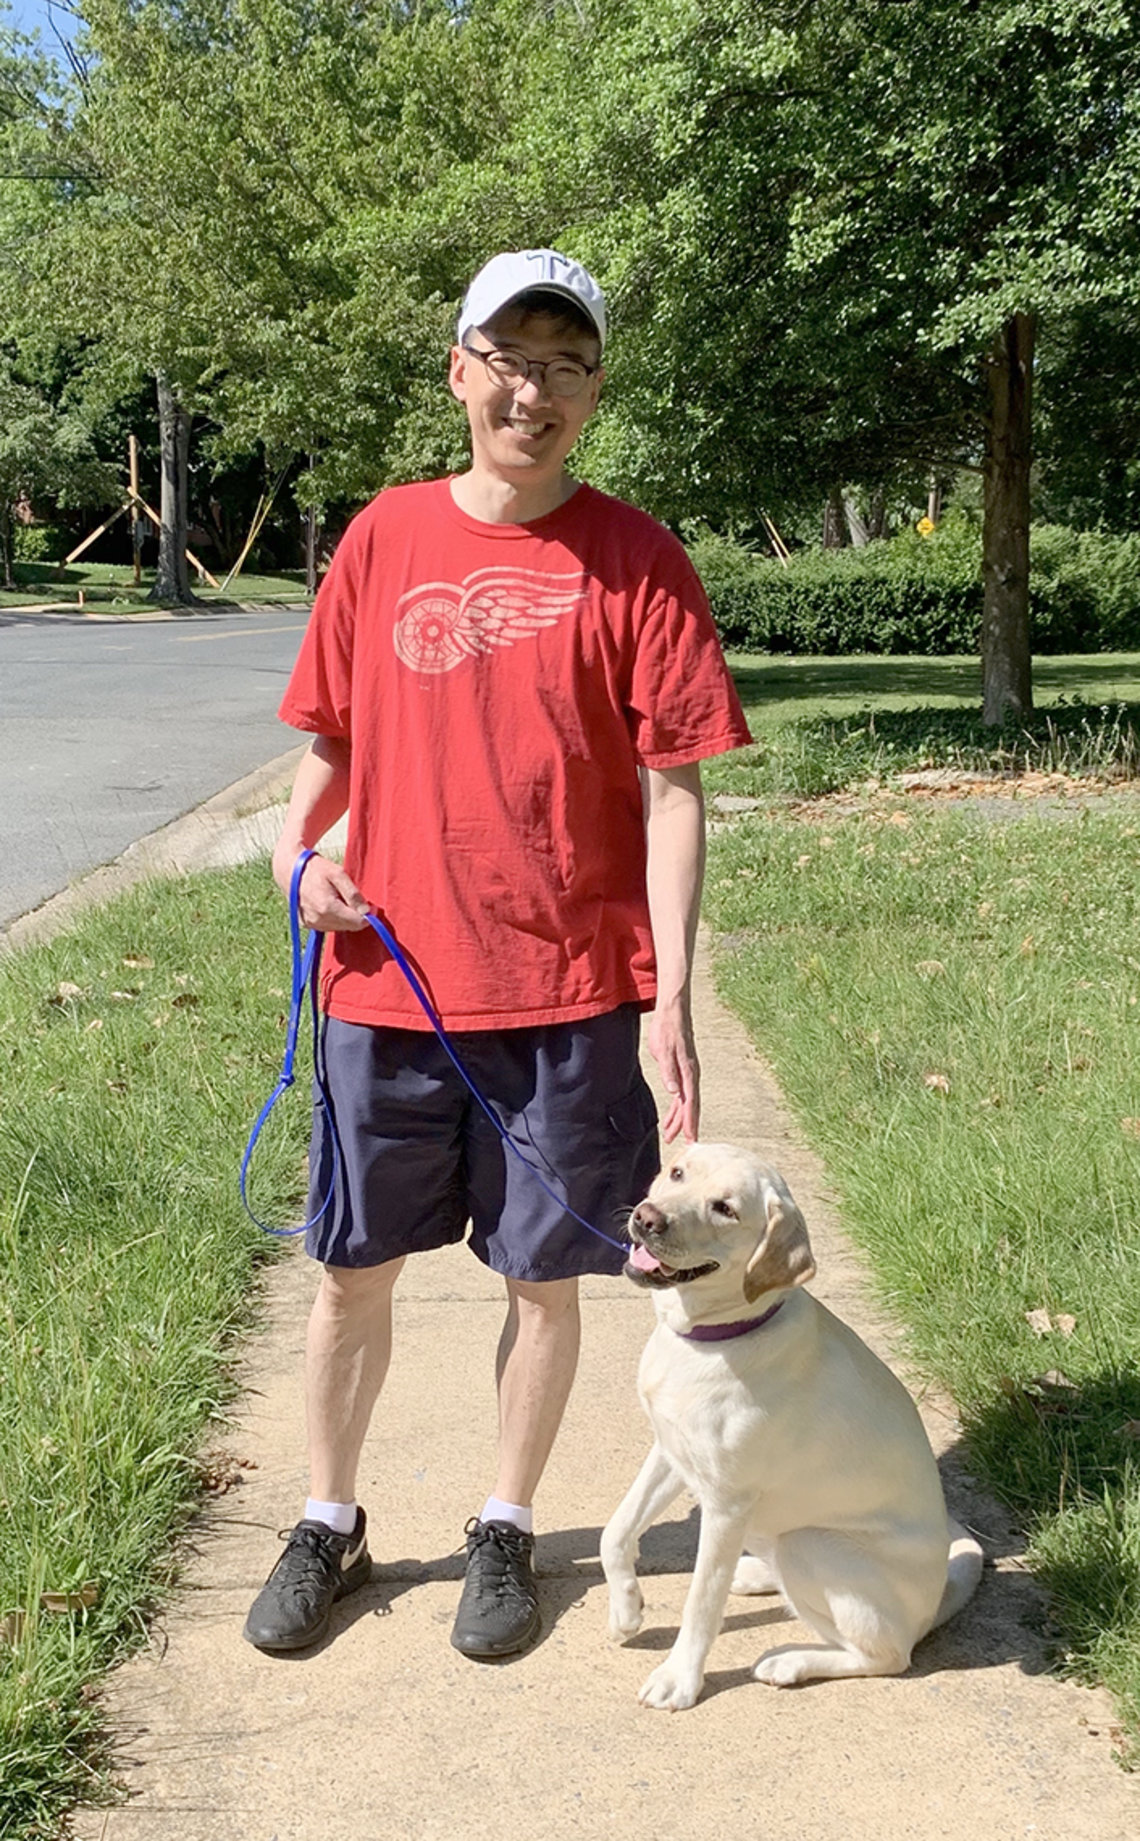 Chiang in shorts and T shirt with dog on leash